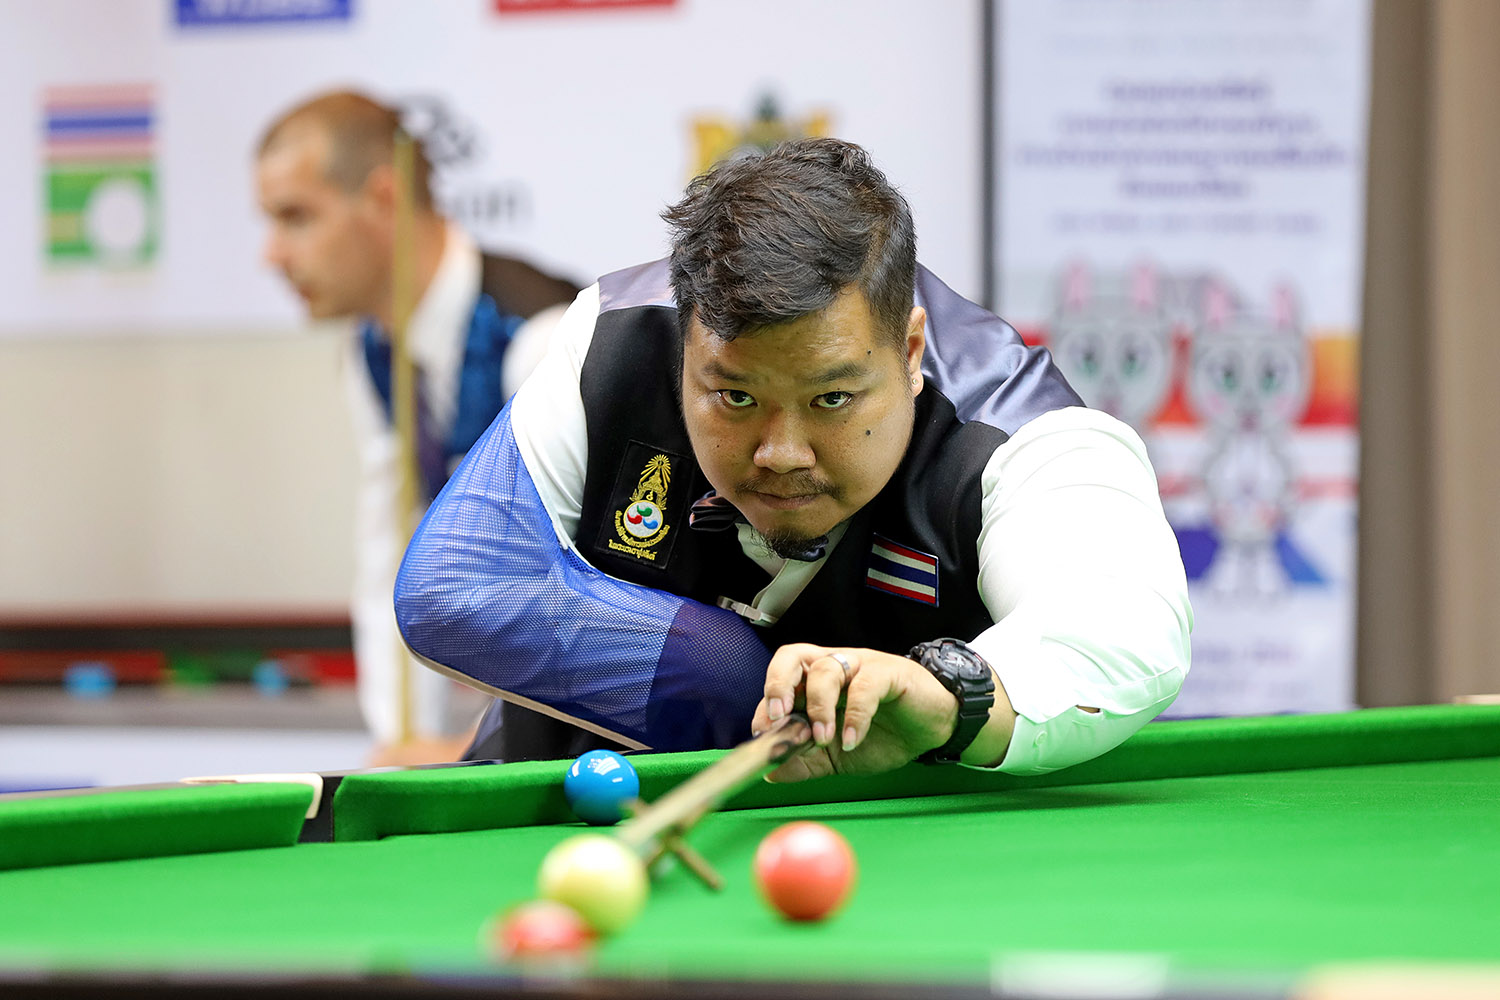 Thanapol Seekao plays snooker shot with rest